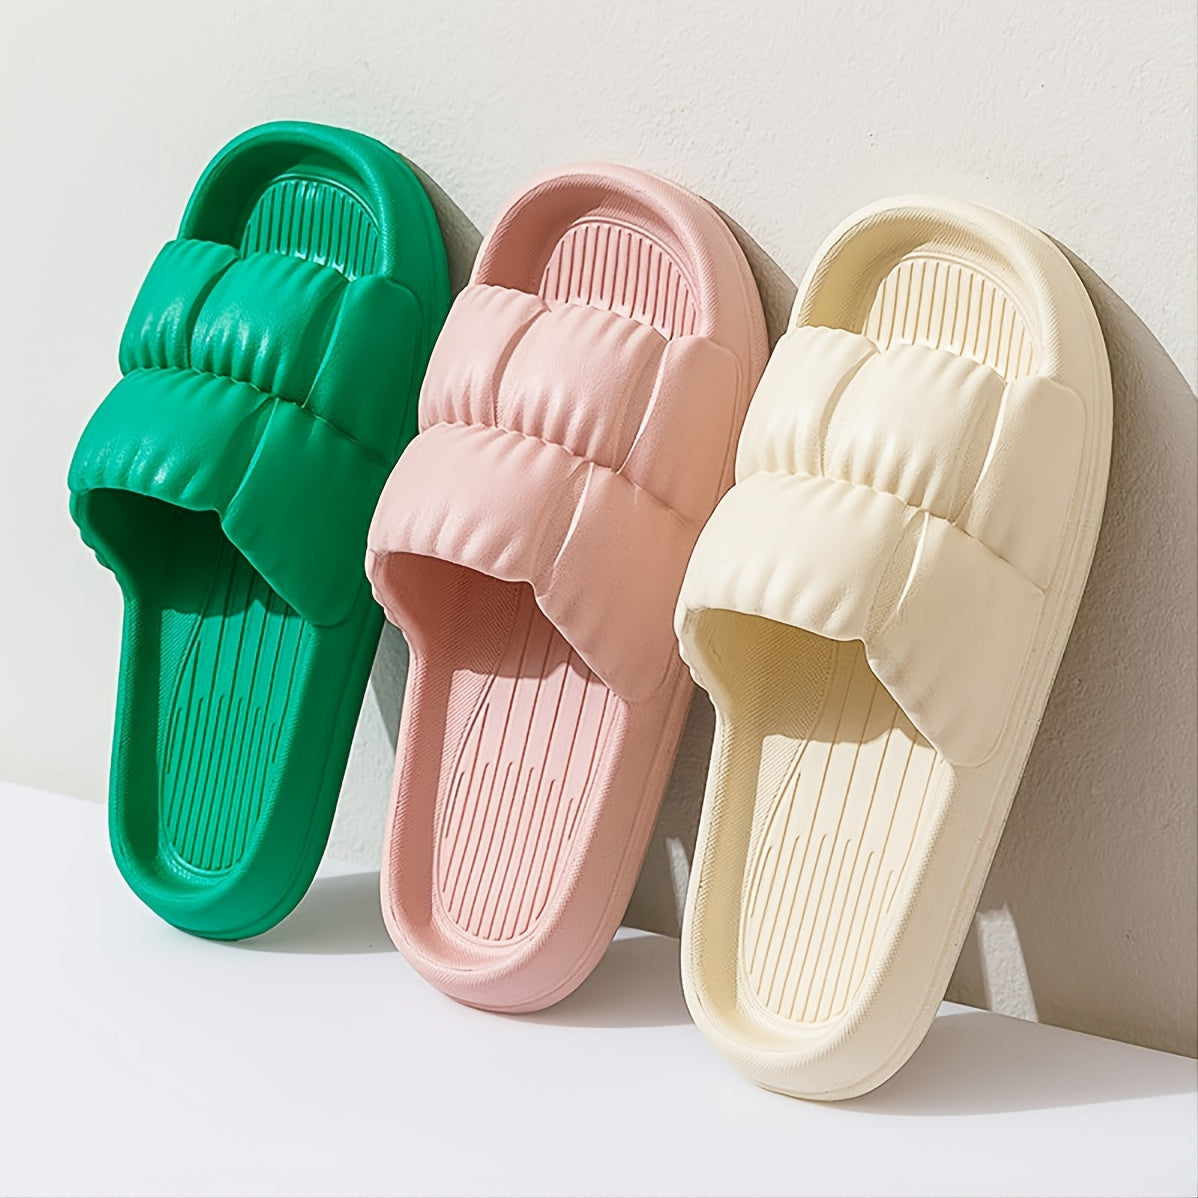 HAERIN Soft Sole Slippers